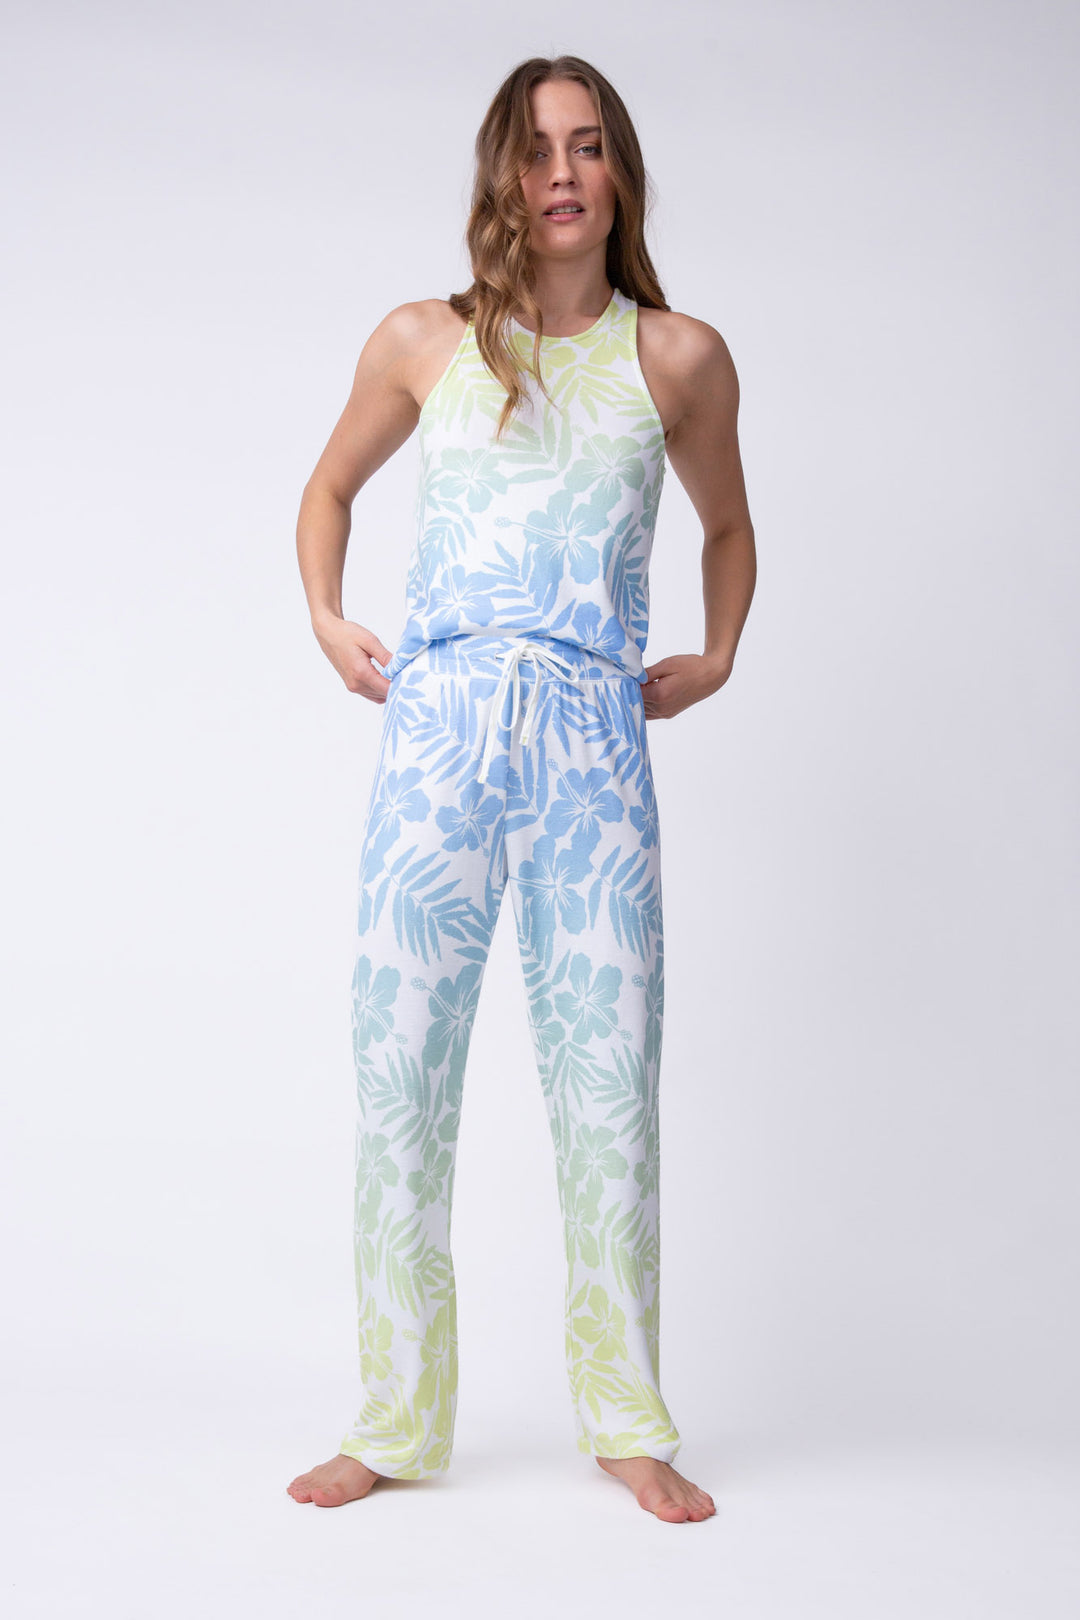 Women's straight leg lounge pant in ivory-blue-green tropical with tie waist.